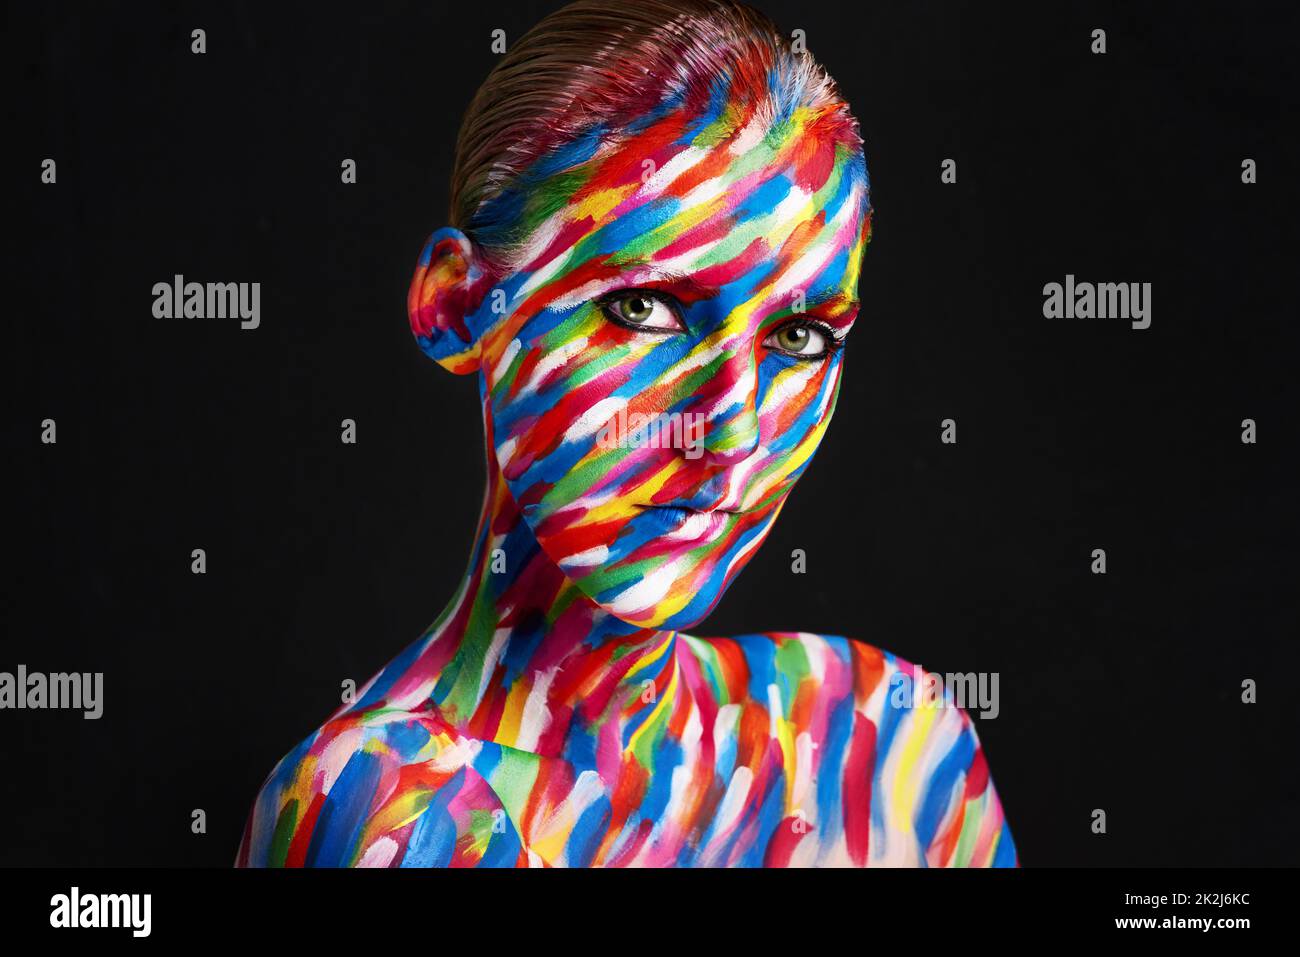 Eye catching, eye popping colorful beauty. Studio shot of a young woman posing with brightly colored paint on her face against a black background. Stock Photo